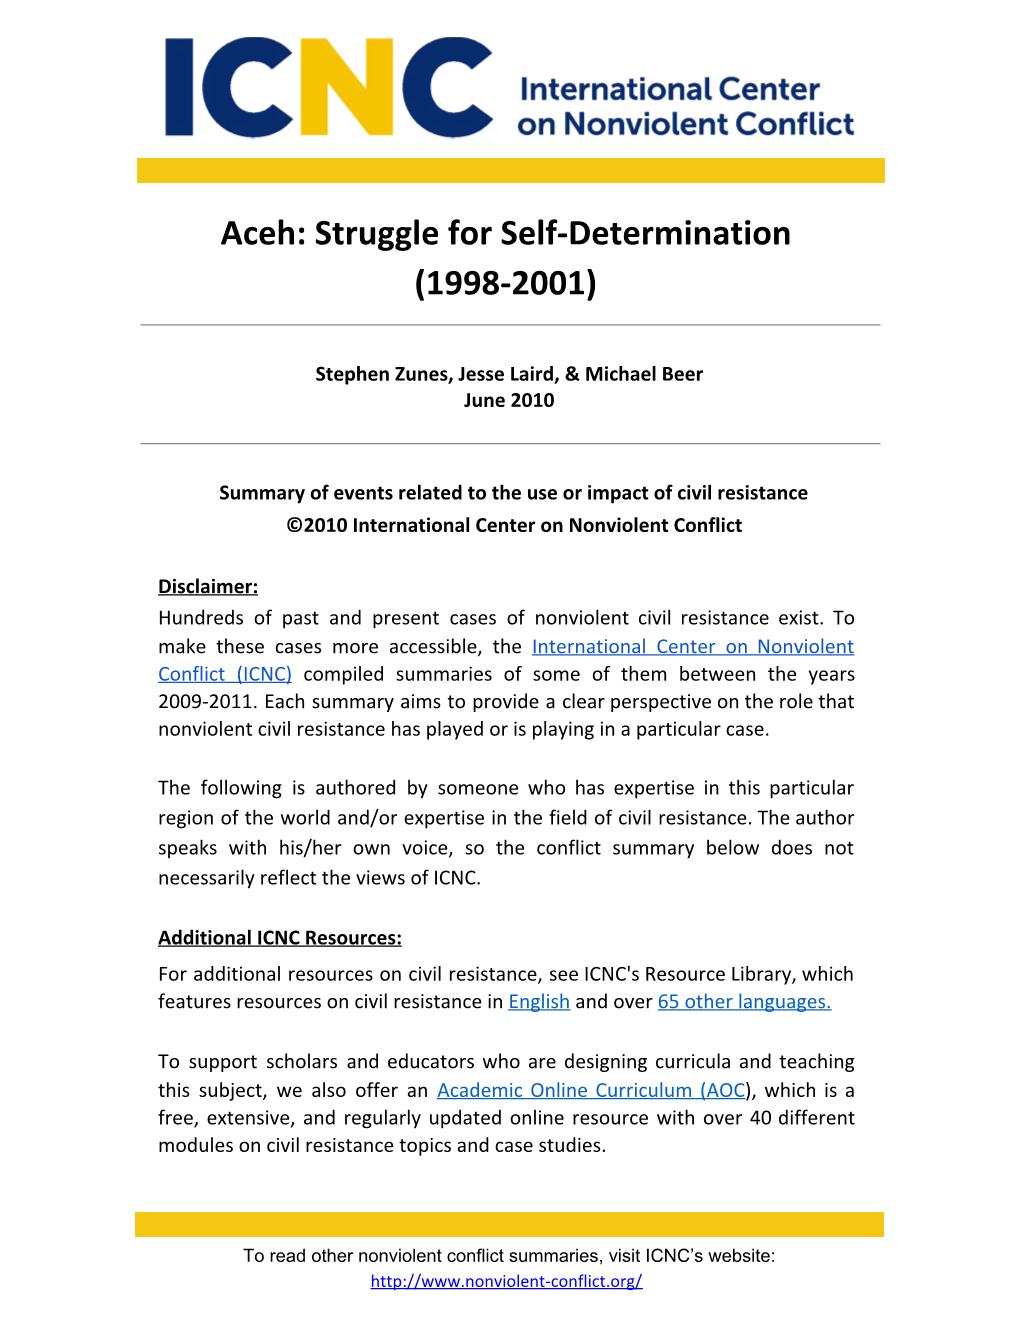 Aceh: Struggle for Self-Determination